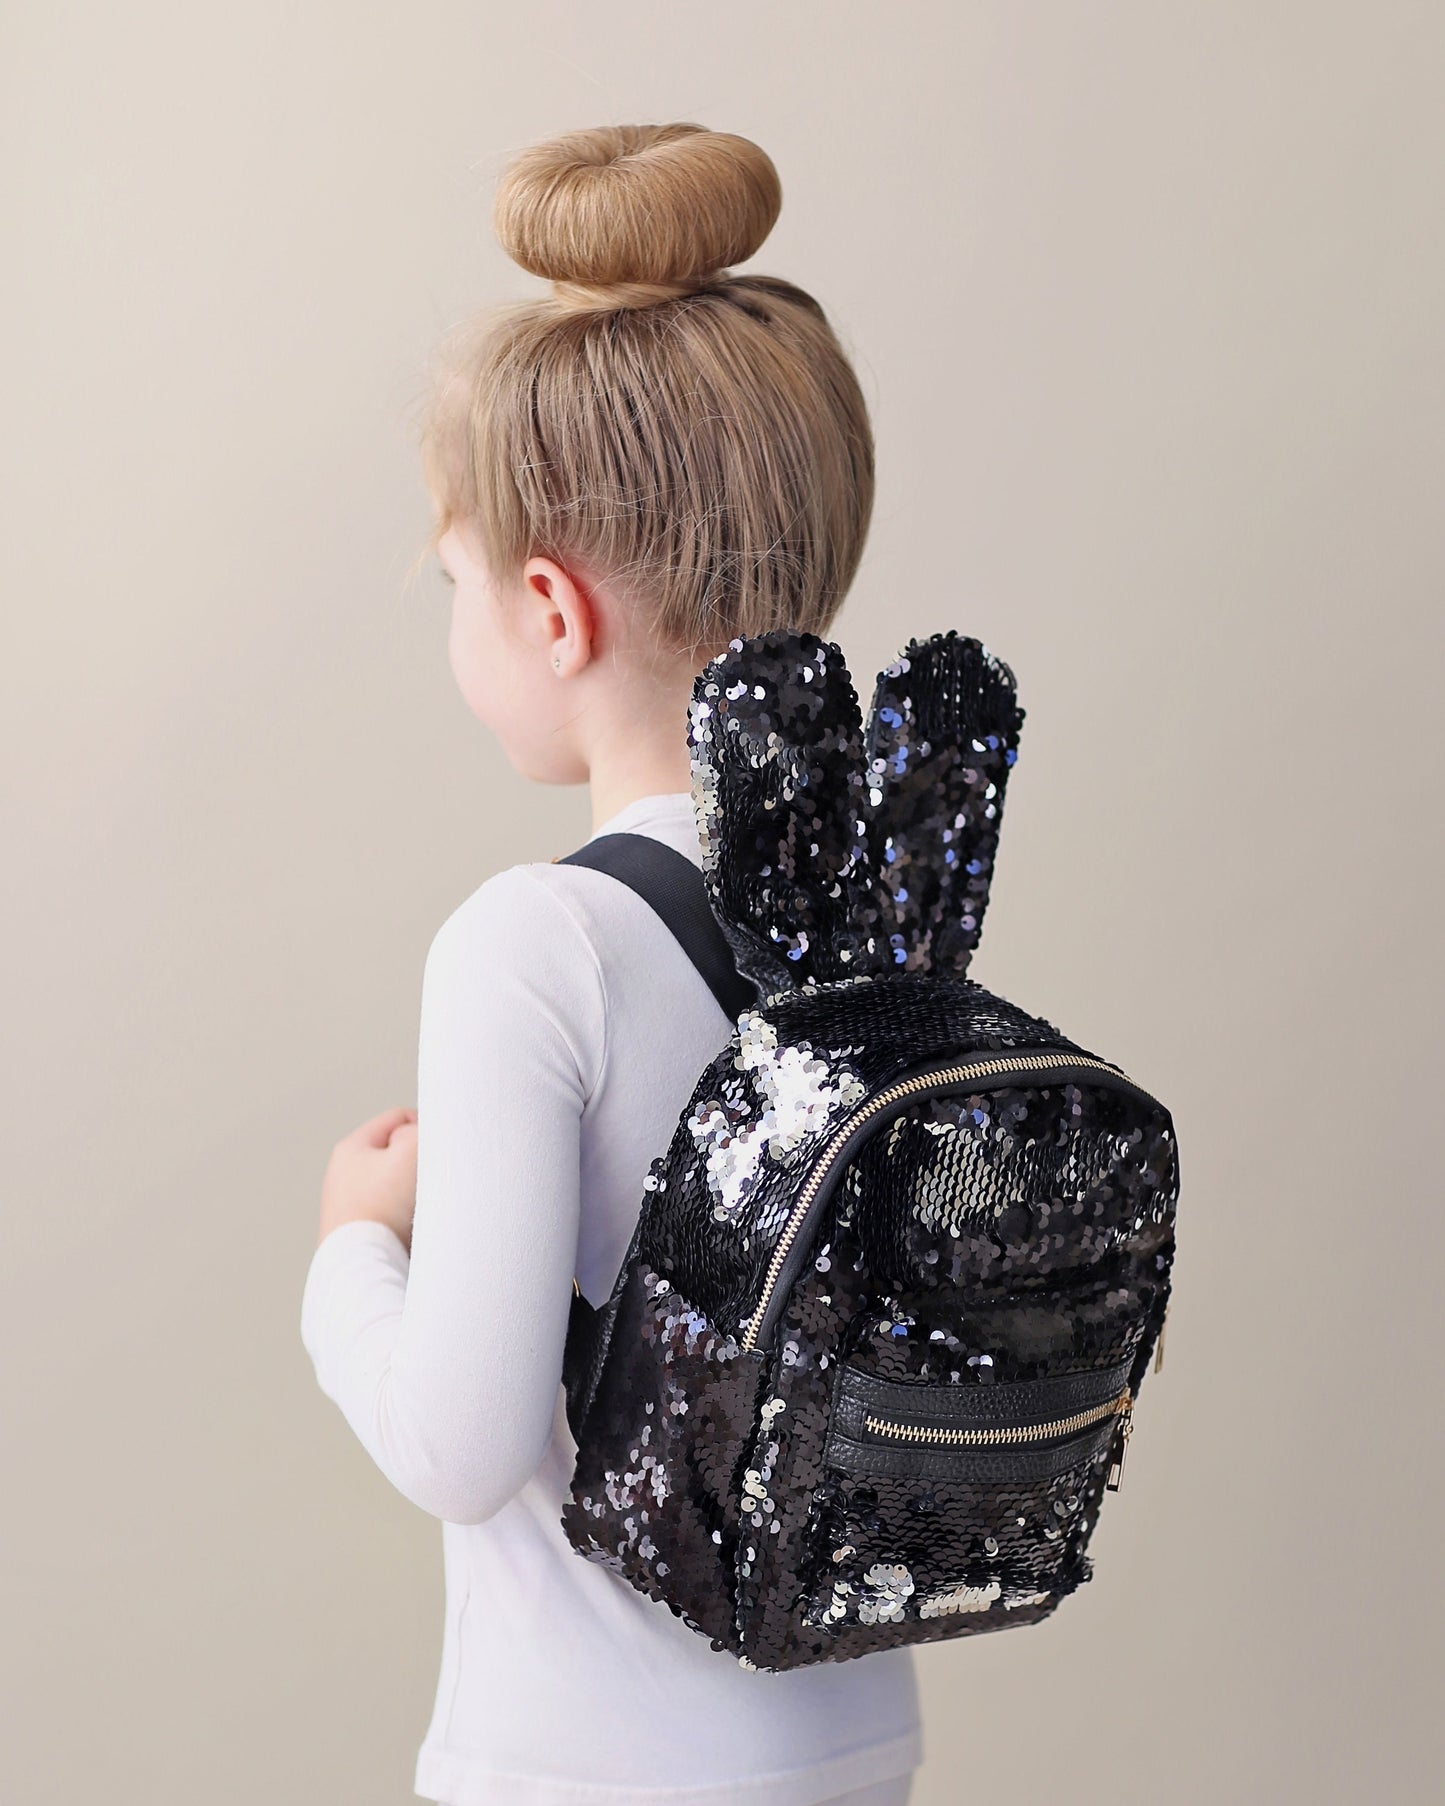 Black and Silver Bunny Backpack - Bunny Backpack - Bunny Bag - Reversible Sequin Backpack - Sequin Backpack - Sequin Bag